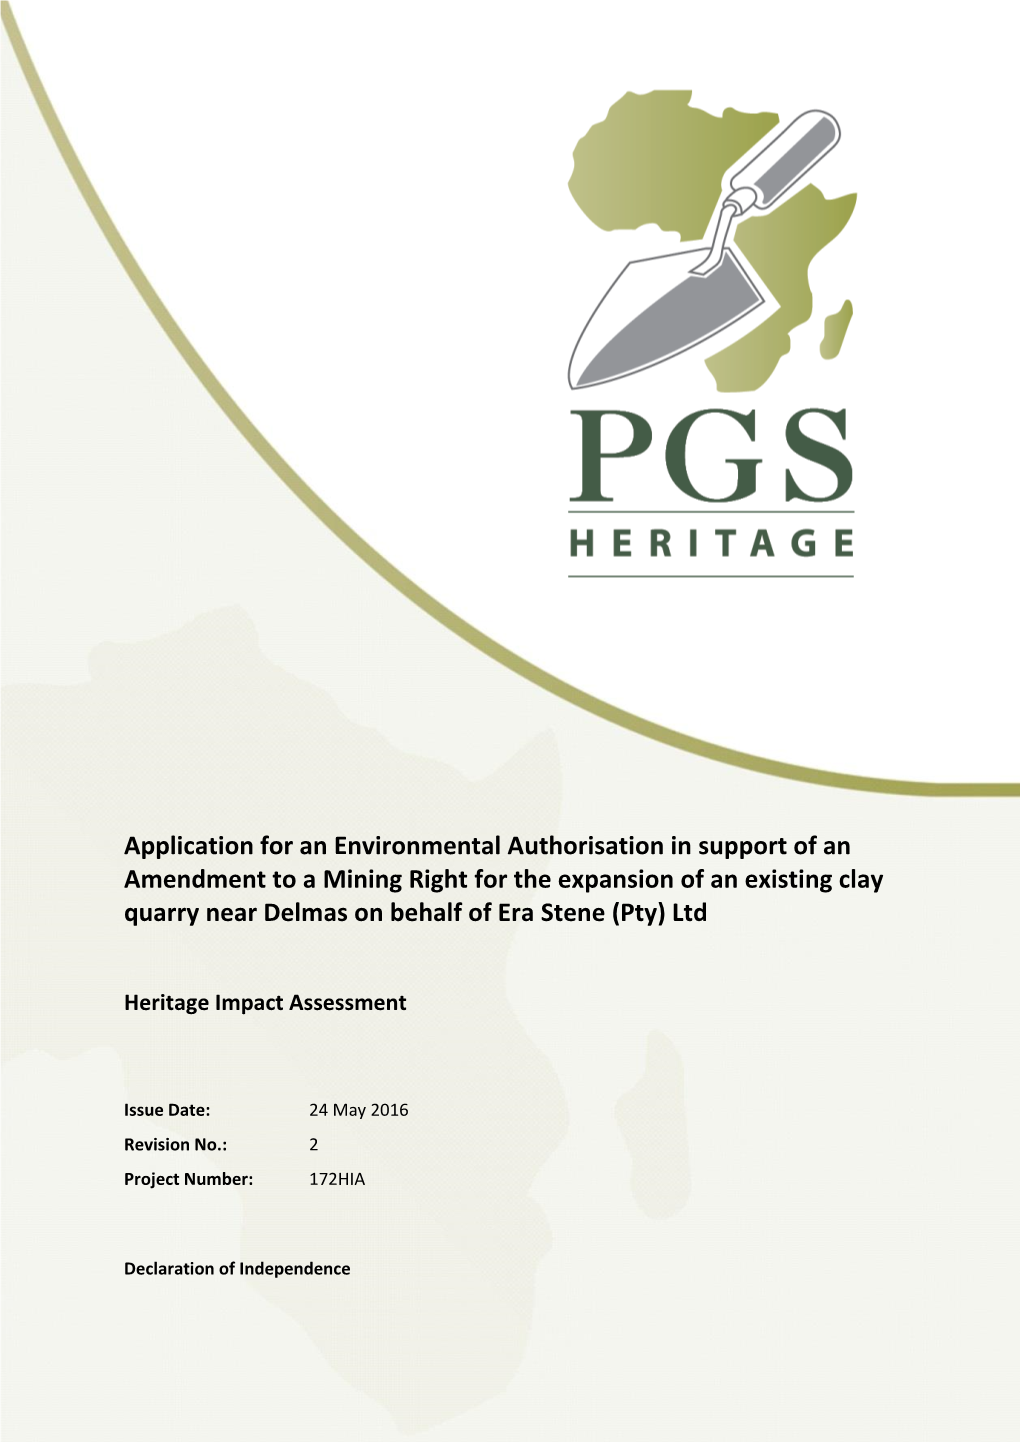 Application for an Environmental Authorisation in Support of An